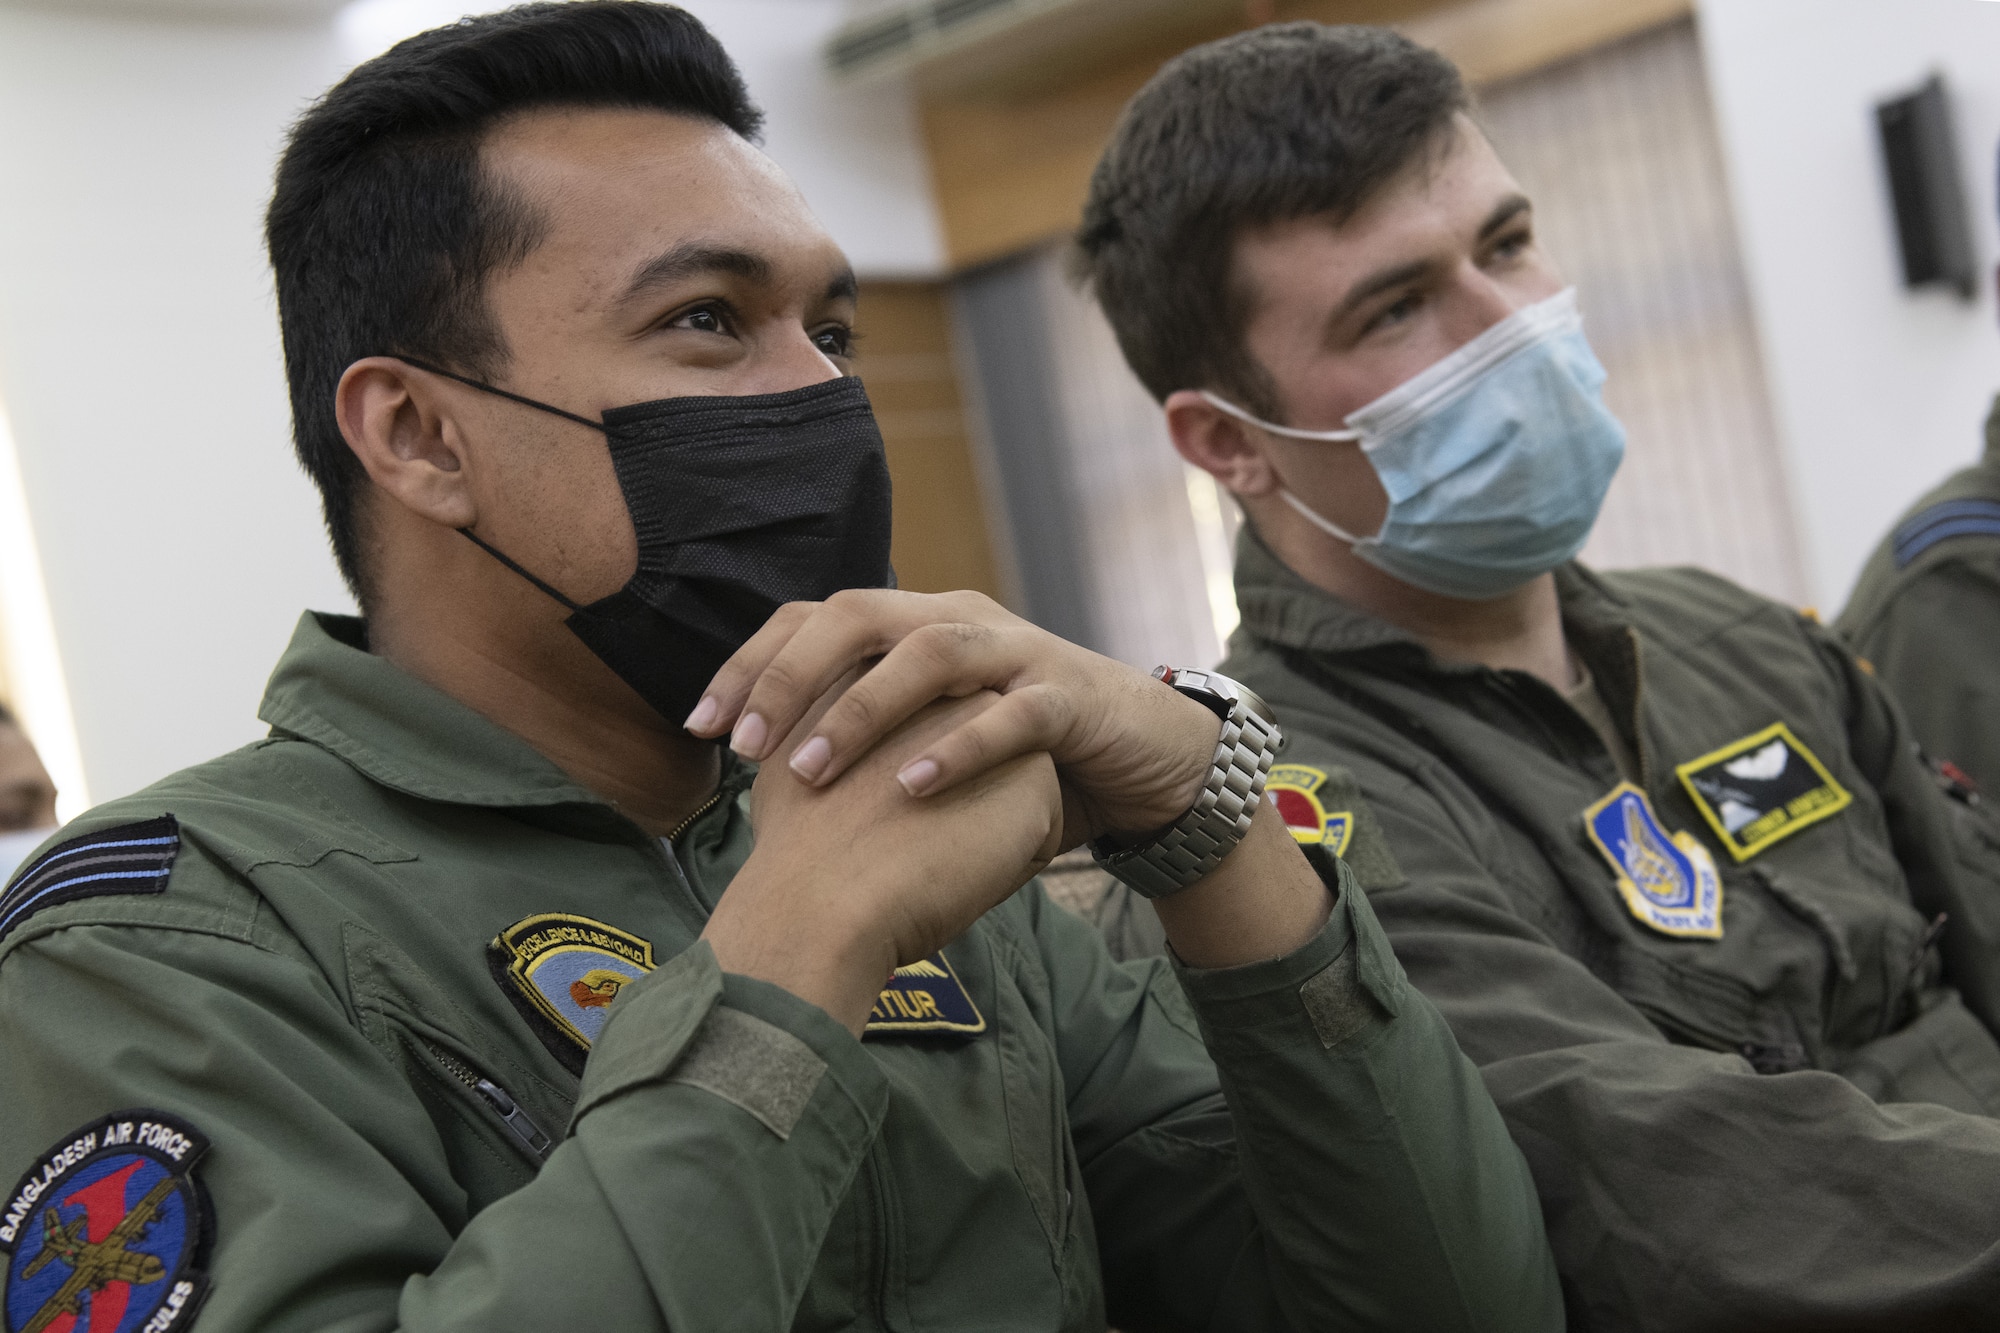 Flight Lieutenant Rashman Atiur, left, Bangladesh air force (BAF) pilot, and 1st Lt Connor Armfield, right, 36th Expeditionary Airlift Squadron C-130J Super Hercules pilot, listen to a briefing focused on C-130 capabilities during a subject matter exchange event as part of Exercise Cope South 2022, Feb. 19, 2022, at BAF Base Bangabandhu, Bangladesh. Discussions during the SME event also included best practices on low level flight, aircrew flight equipment nomenclature and crew resource management. Exercise Cope South is a Pacific Air Forces-sponsored bilateral tactical airlift exercise designed to enhance the interoperability between the U.S. Air Force and BAF. (U.S. Air Force photo by Tech. Sgt. Christopher Hubenthal)